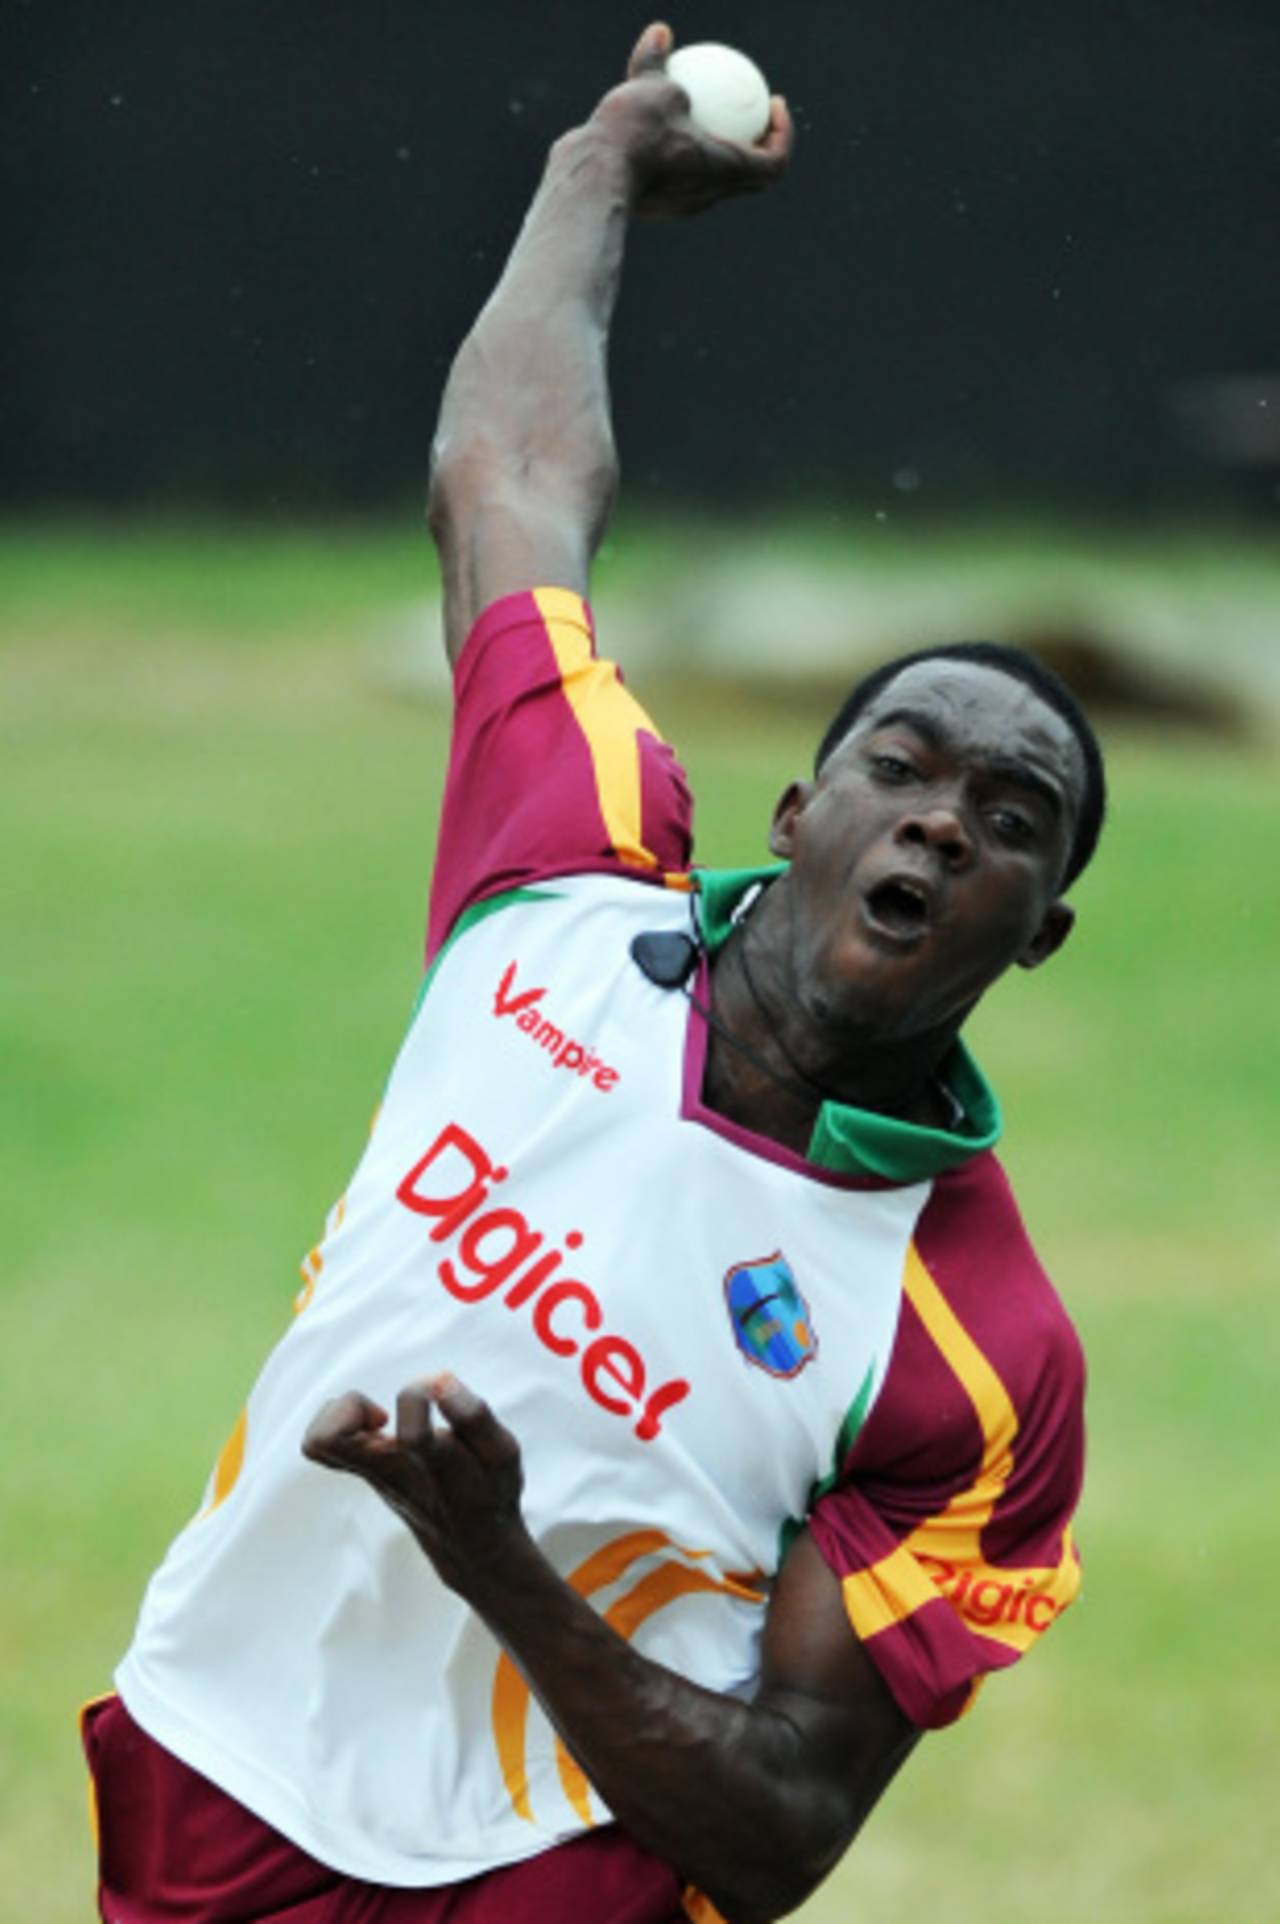 Jerome Taylor bends his back during practice, Jamaica, June 25, 2009